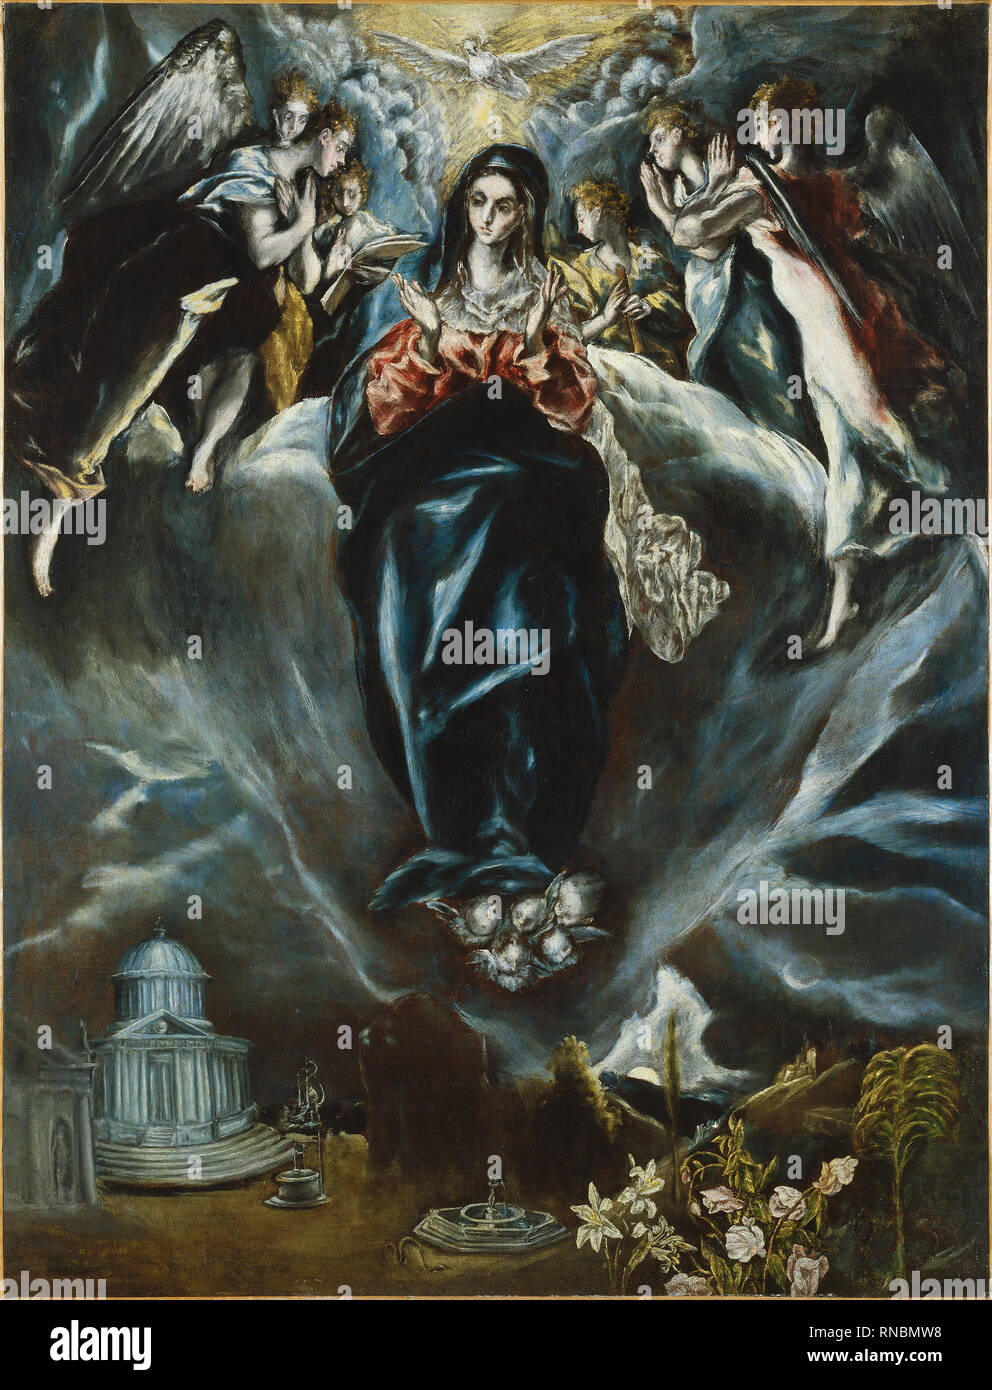 Greco and Jorge Manuel Theotokópoulos (Candía, 1541 and Toledo, ca. 1578 - Toledo, 1614 and Toledo 1631). The Immaculate Conception (ca. 1608 - 1614). Oil on canvas. 108 x 82 cm. Museum: Museo Nacional Thyssen-Bornemisza, Madrid. Stock Photo